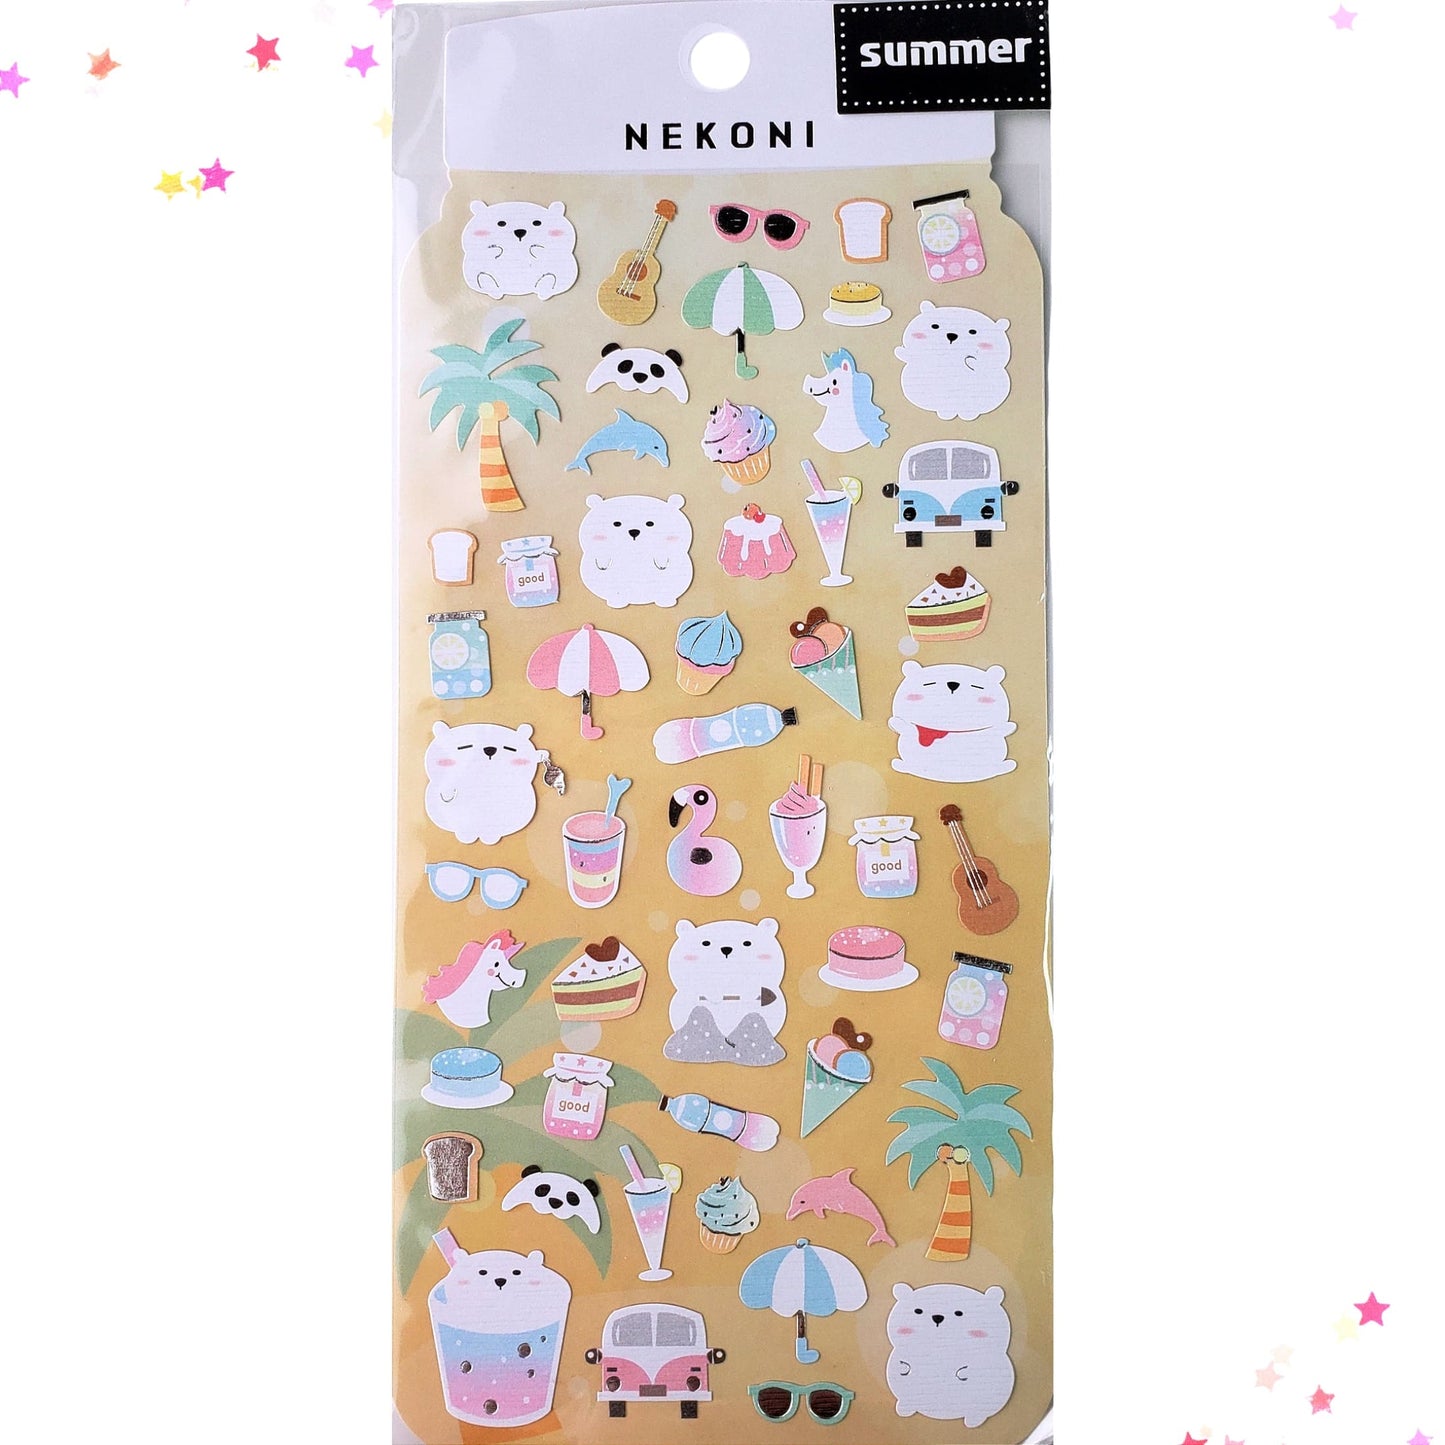 Premium Sticker - Nekoni Bear at the Beach Summer Journal Stickers from Confetti Kitty, Only 5.99